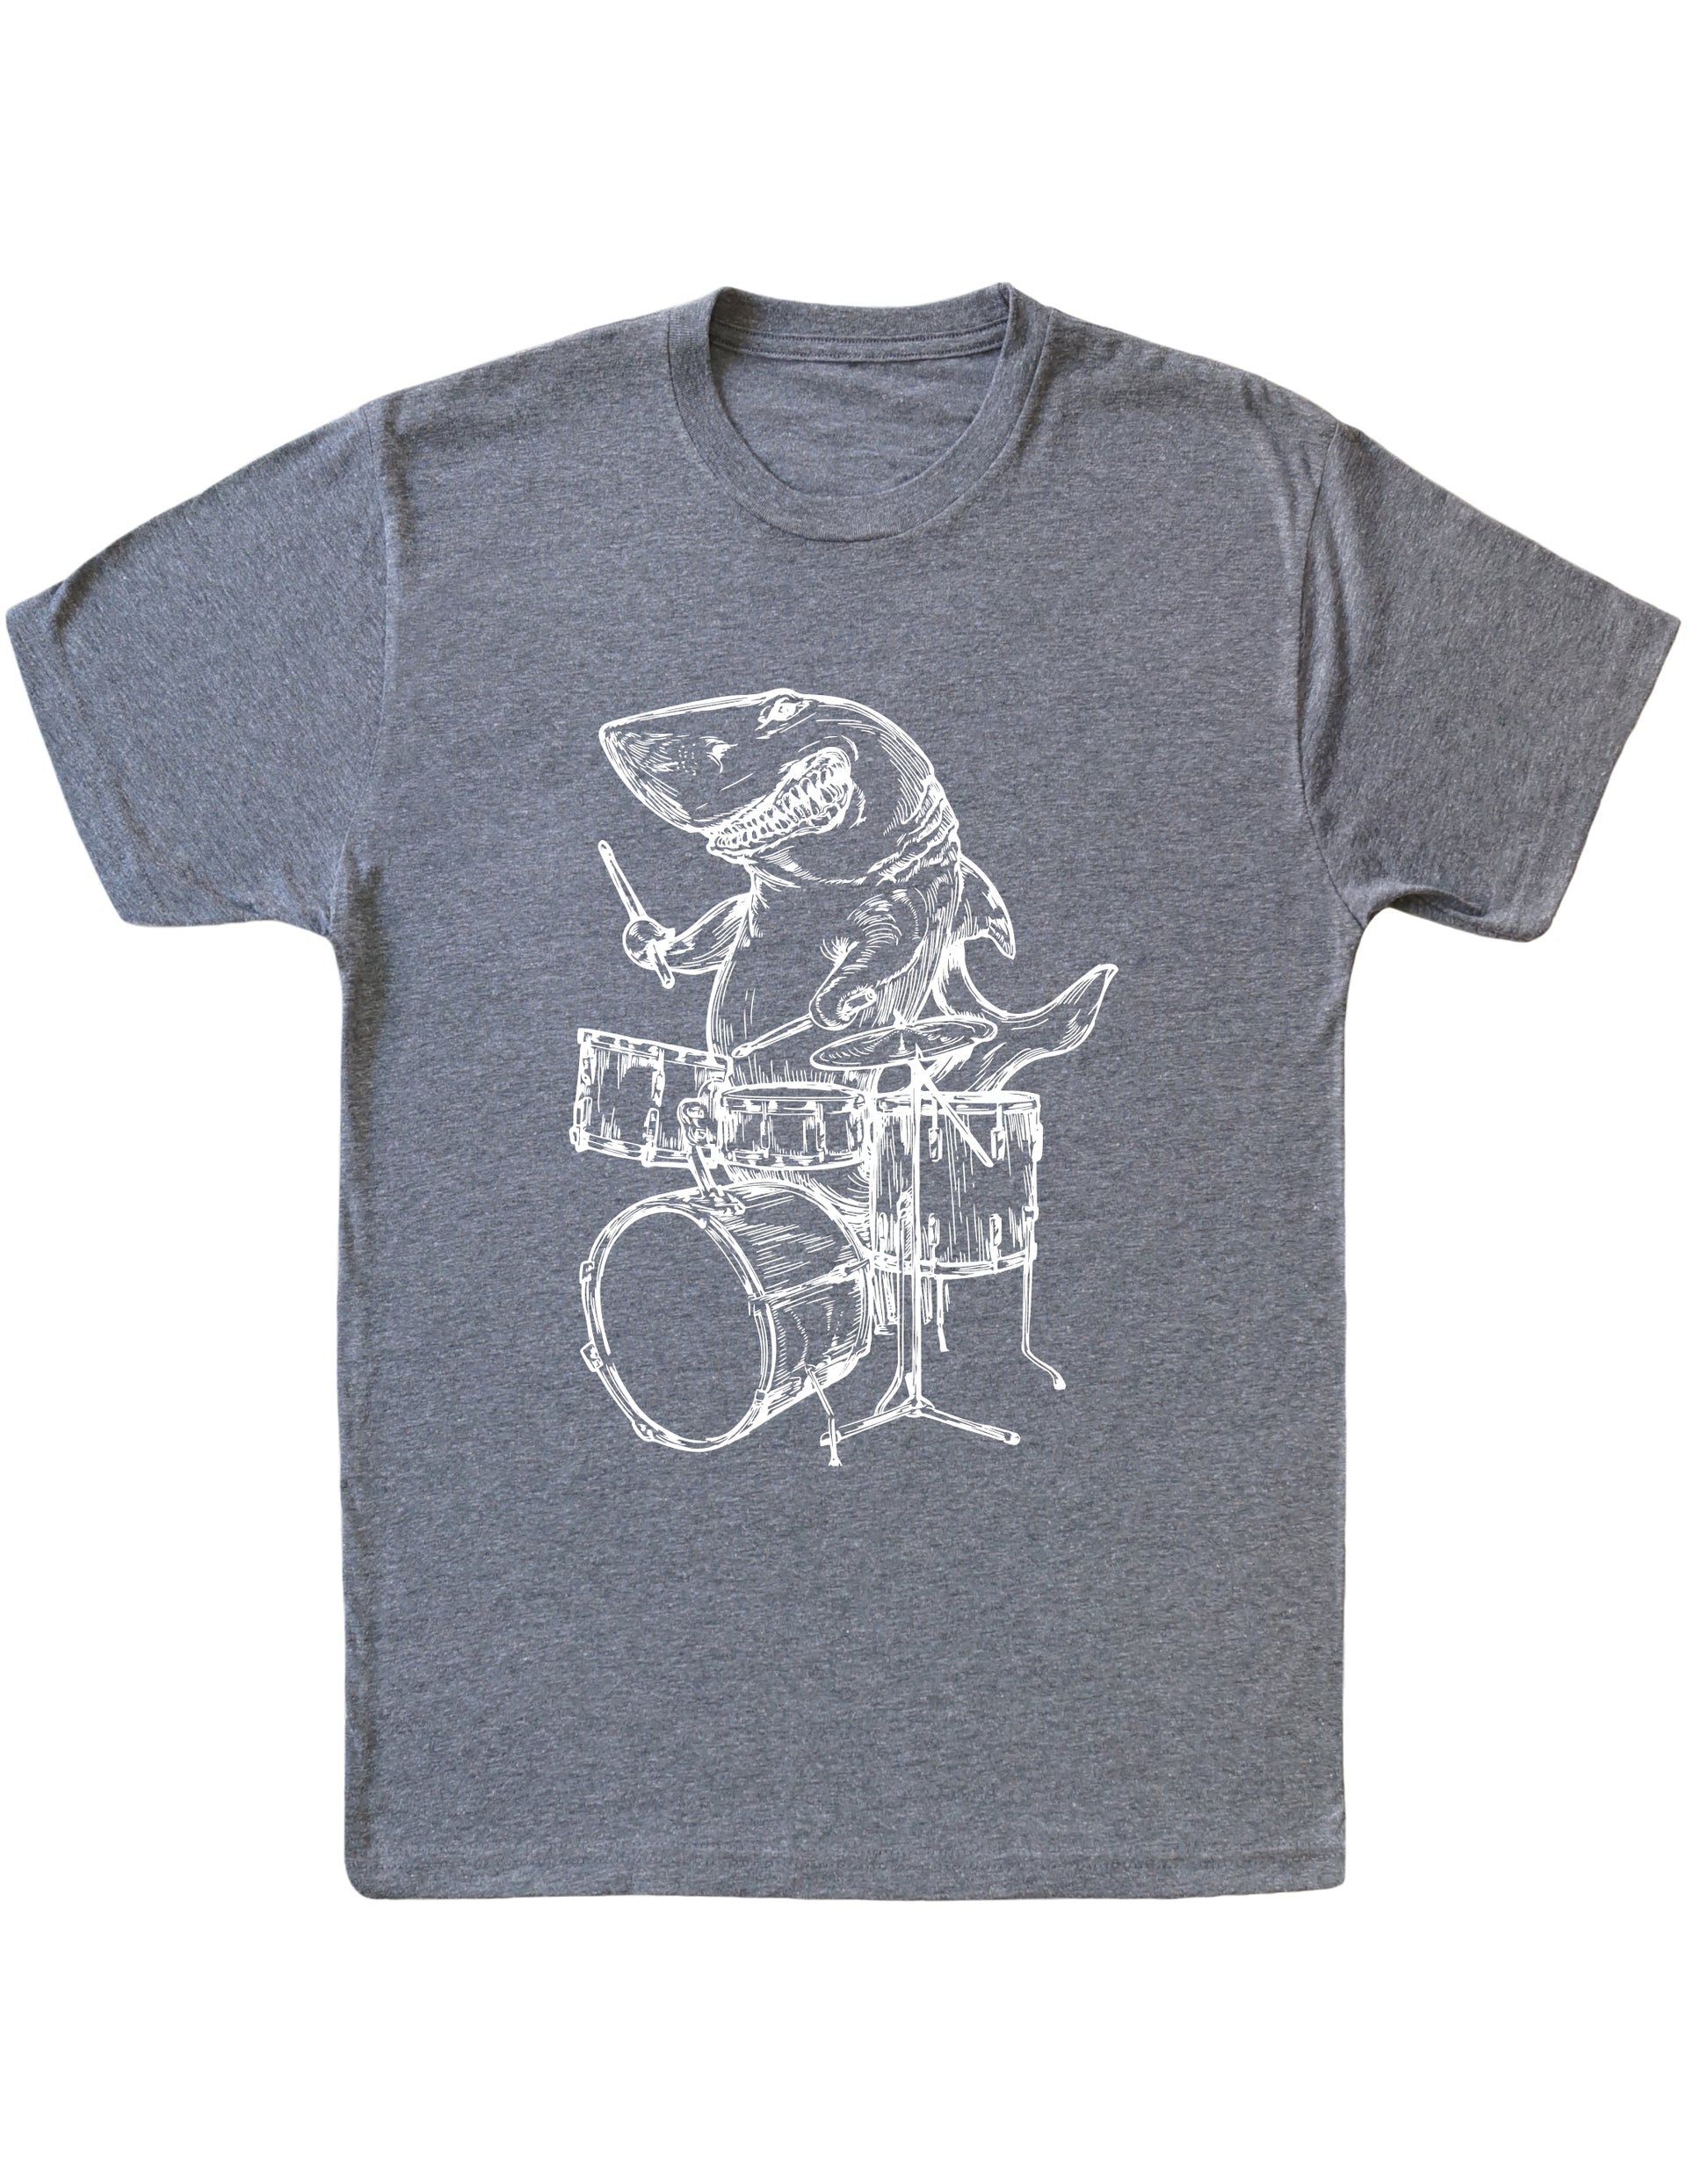 seembo-shark-funny-drummer-playing-drums-musician-gift-men-vintage-grey-t-shirt-ipe116